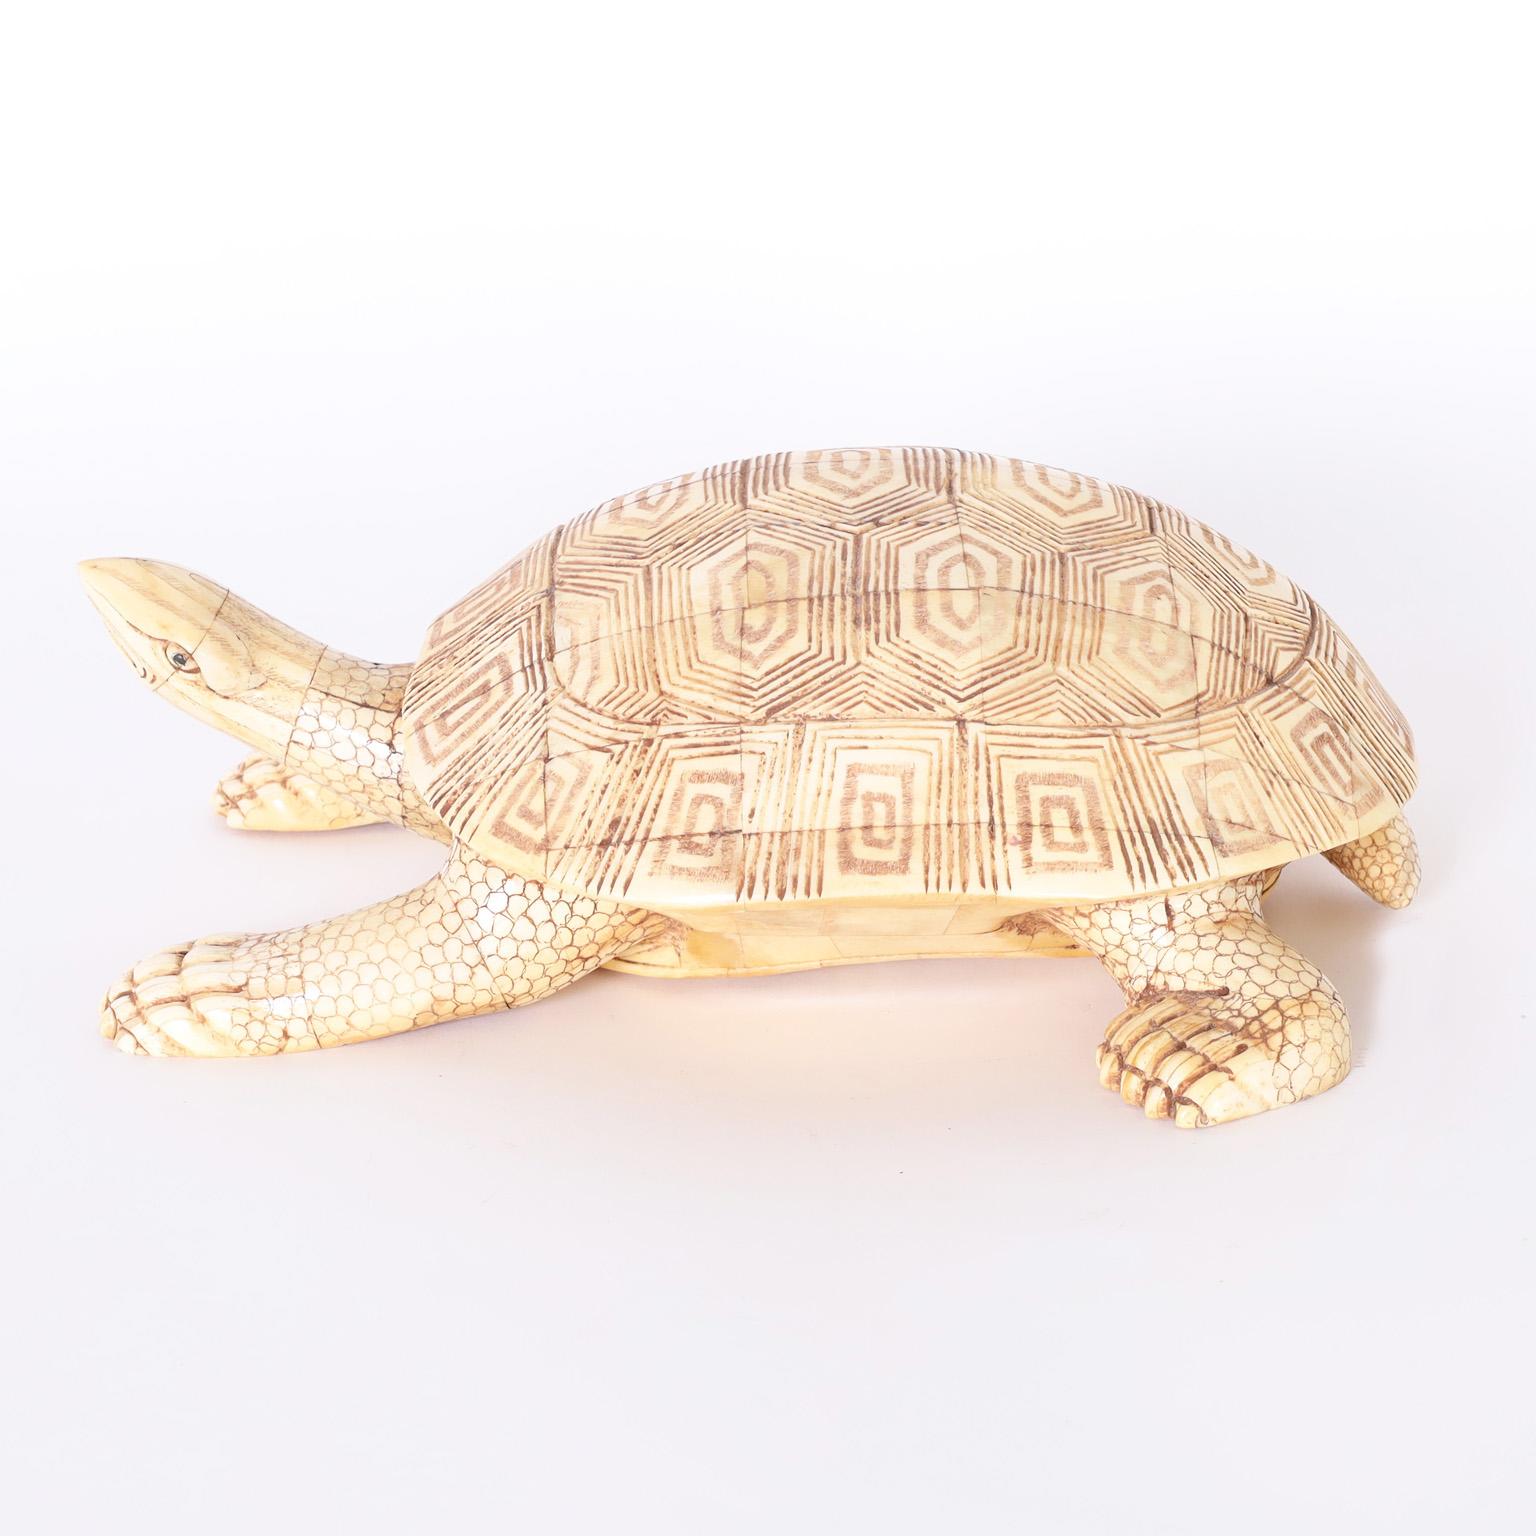 Whimsical turtle sculpture or object of art crafted in carved bone with an organic palette and amusing stylized form.